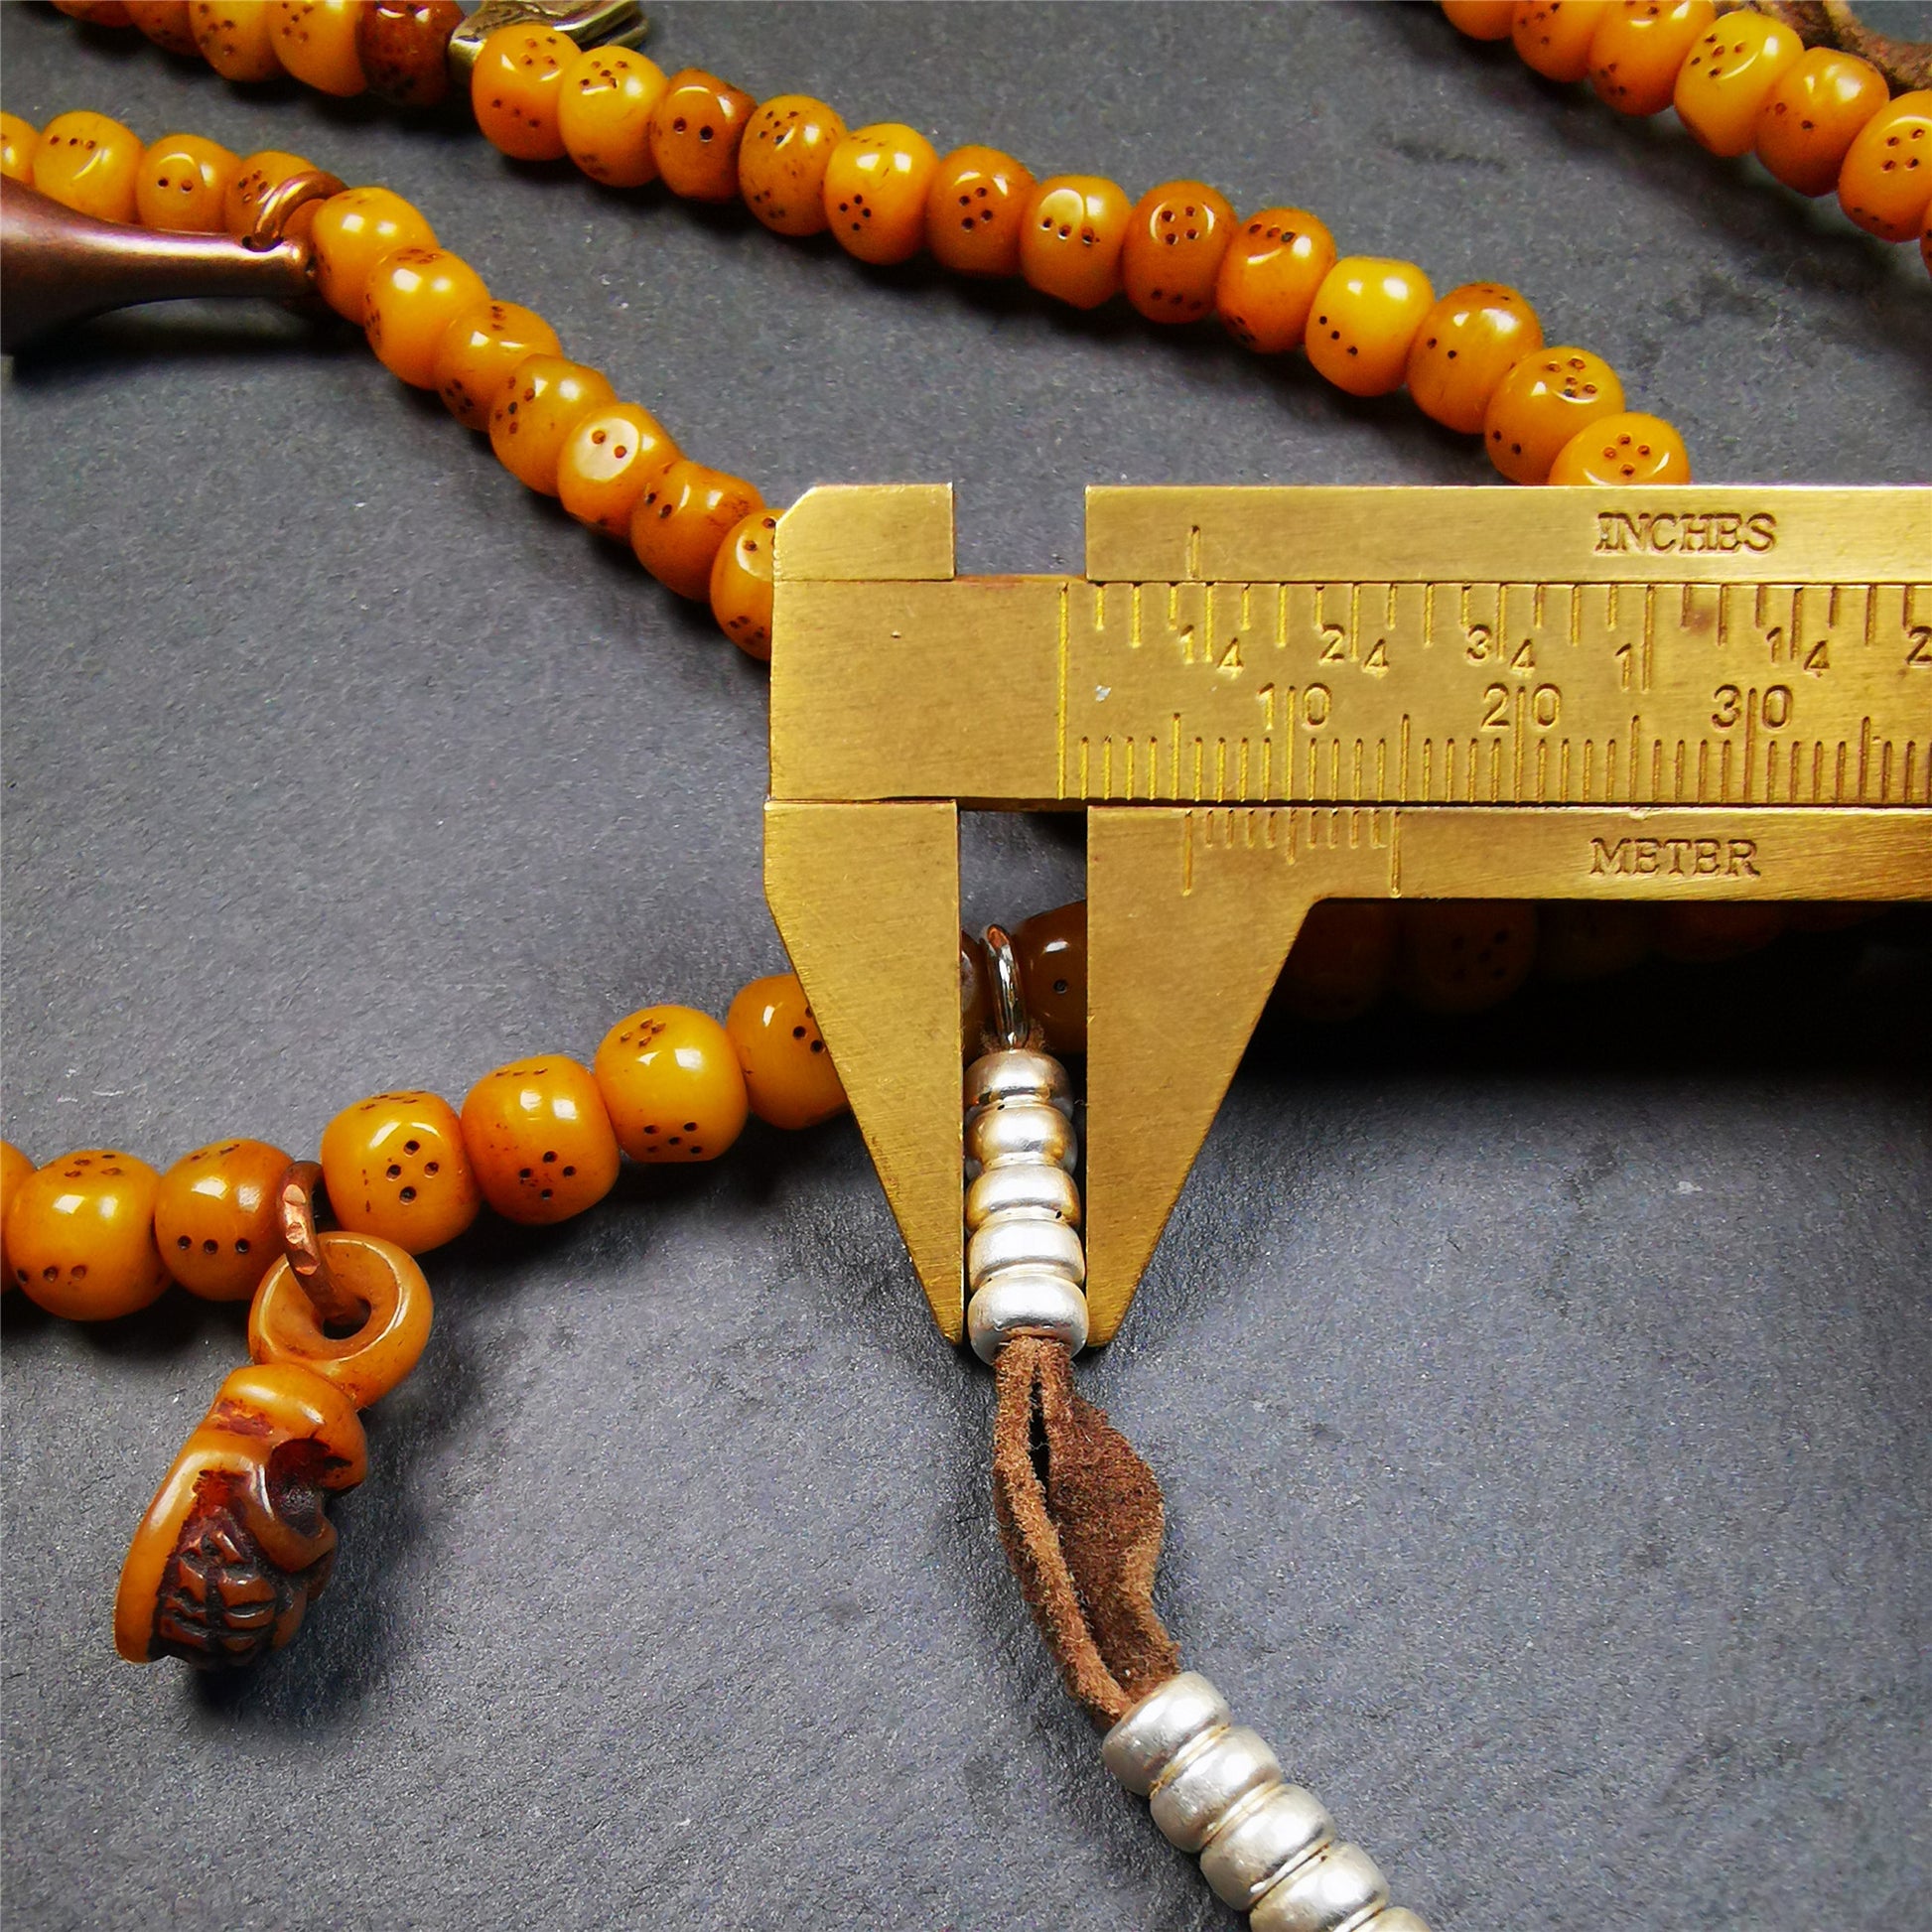 This mala bracelet was made by Tibetan craftsmen. It is made of yak bone, yellow color,108 dice beads diameter of 7mm / 0.27",circumference is 68cm / 26.8",and lots of accessories on it.